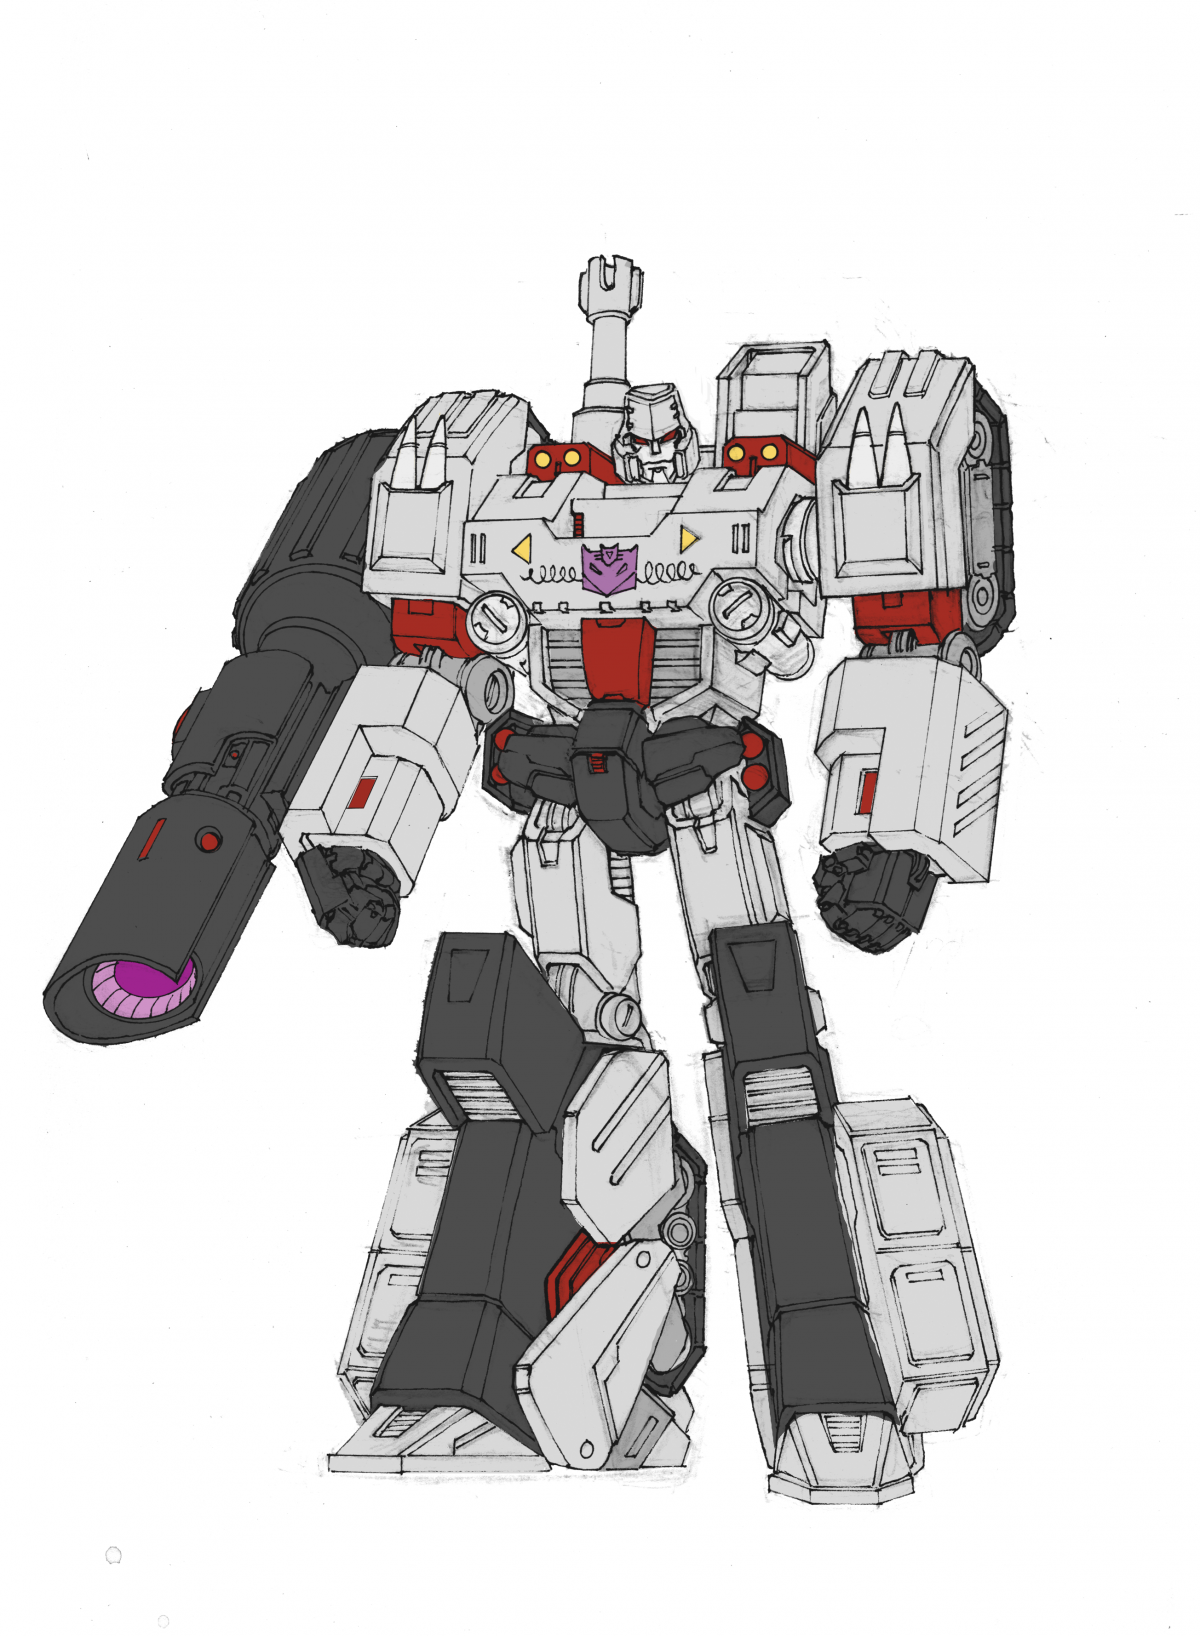 Transformers: Robots in Disguise Megatron Rebuilt Concept Art from Andrew Griffith